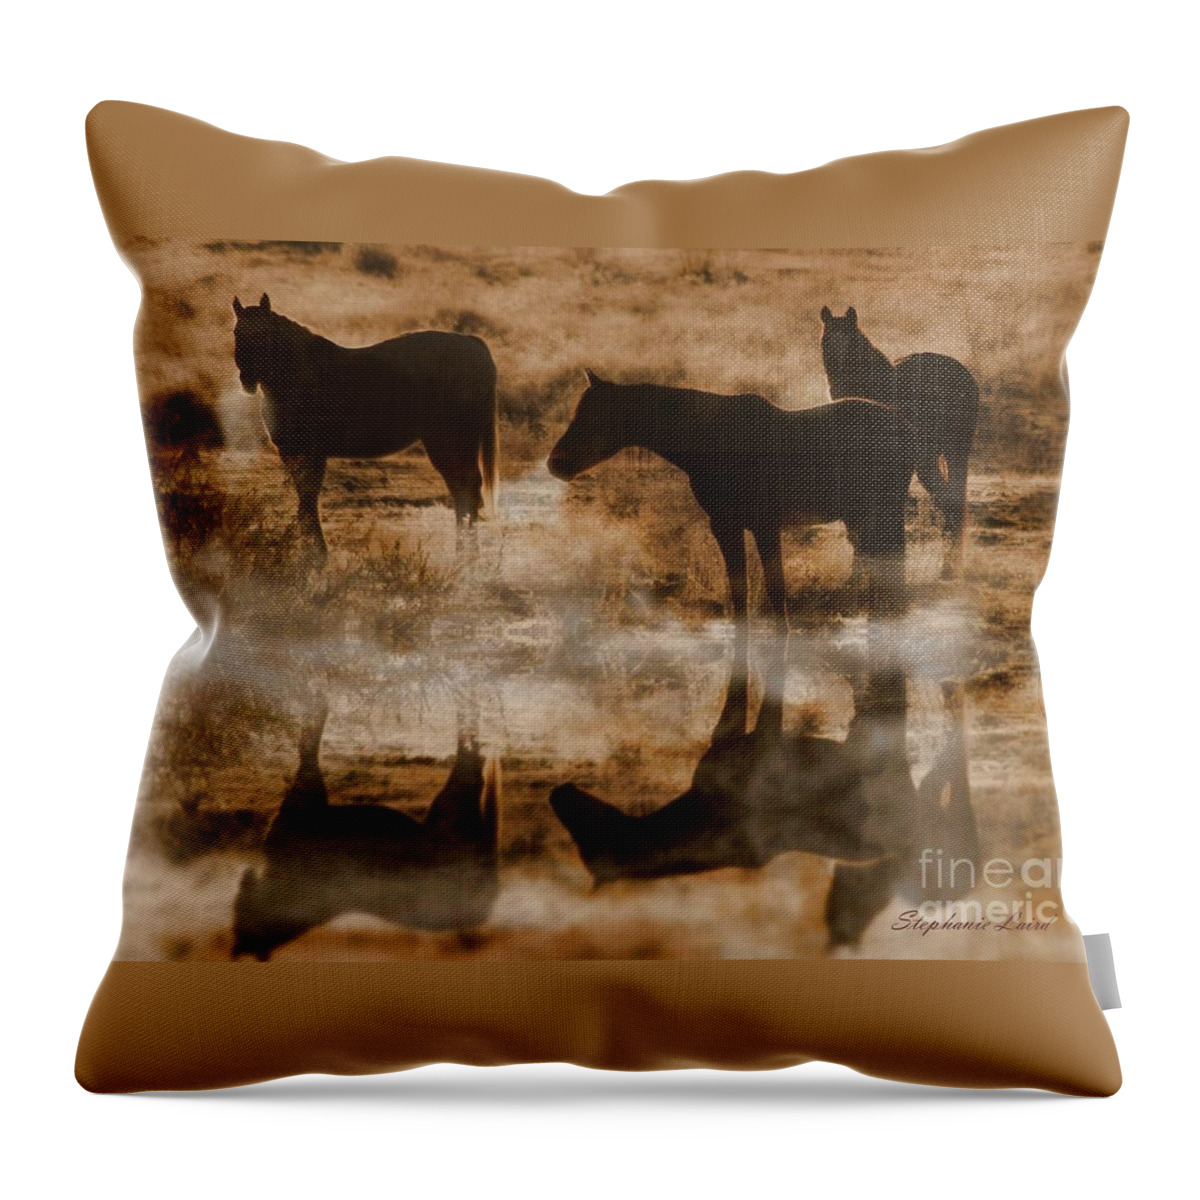 Equine Throw Pillow featuring the photograph Cold Morning by Stephanie Laird